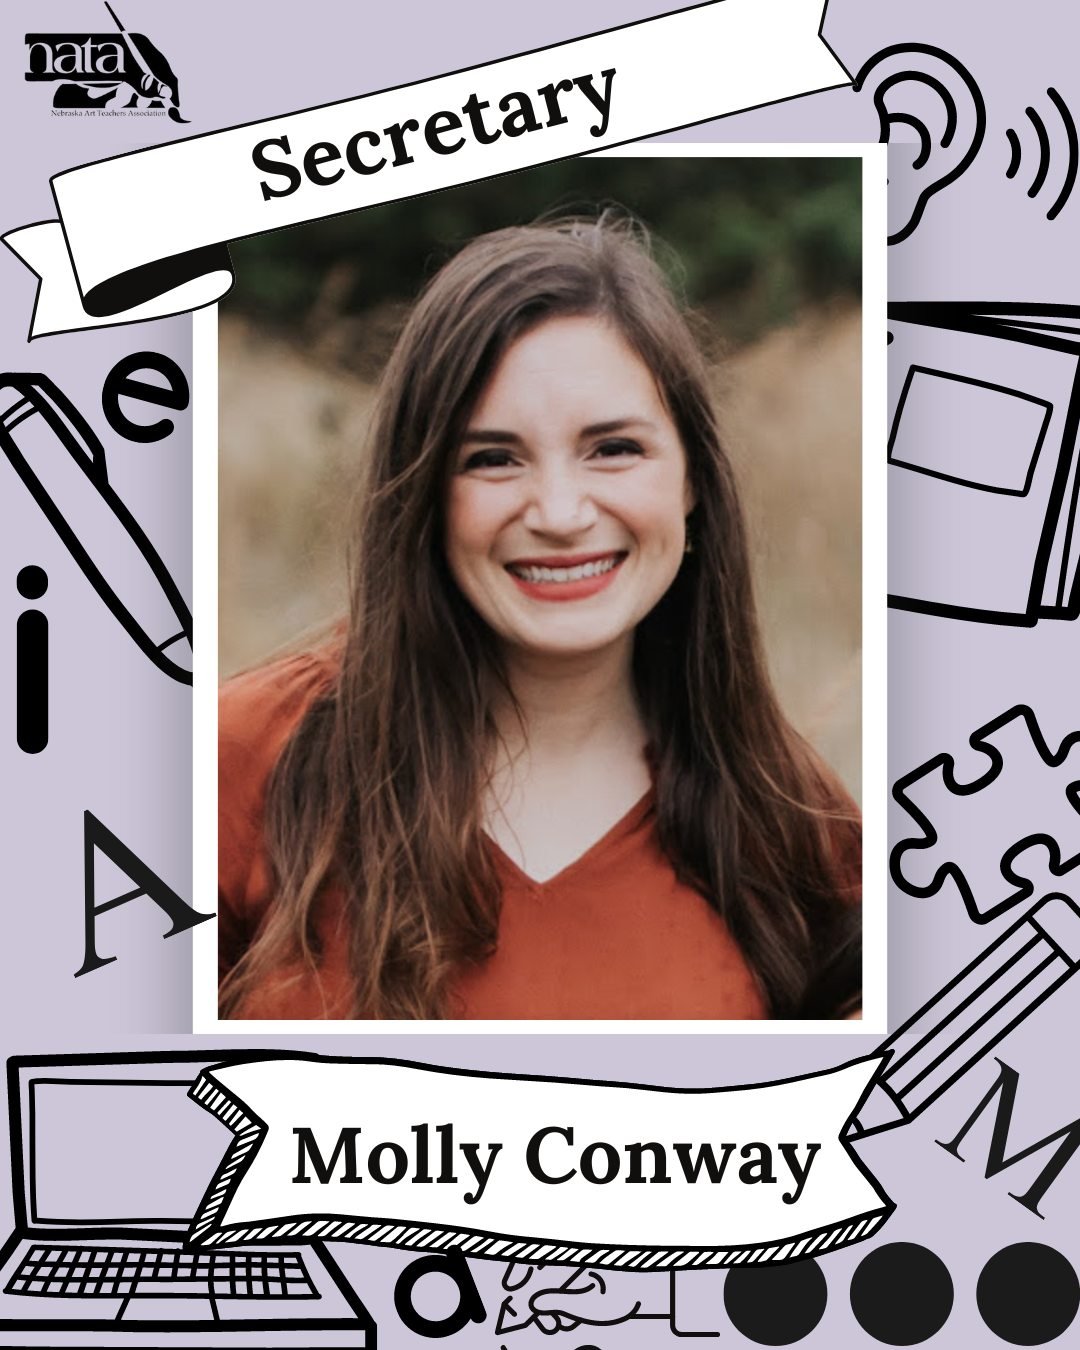 We are excited to be welcoming Molly Conway as our secretary, serving on the executive committee on our sitting board!

&ldquo;Molly Conway is an art teacher at Skutt Catholic High School in Omaha enjoying her 15th year of teaching. She previously ta